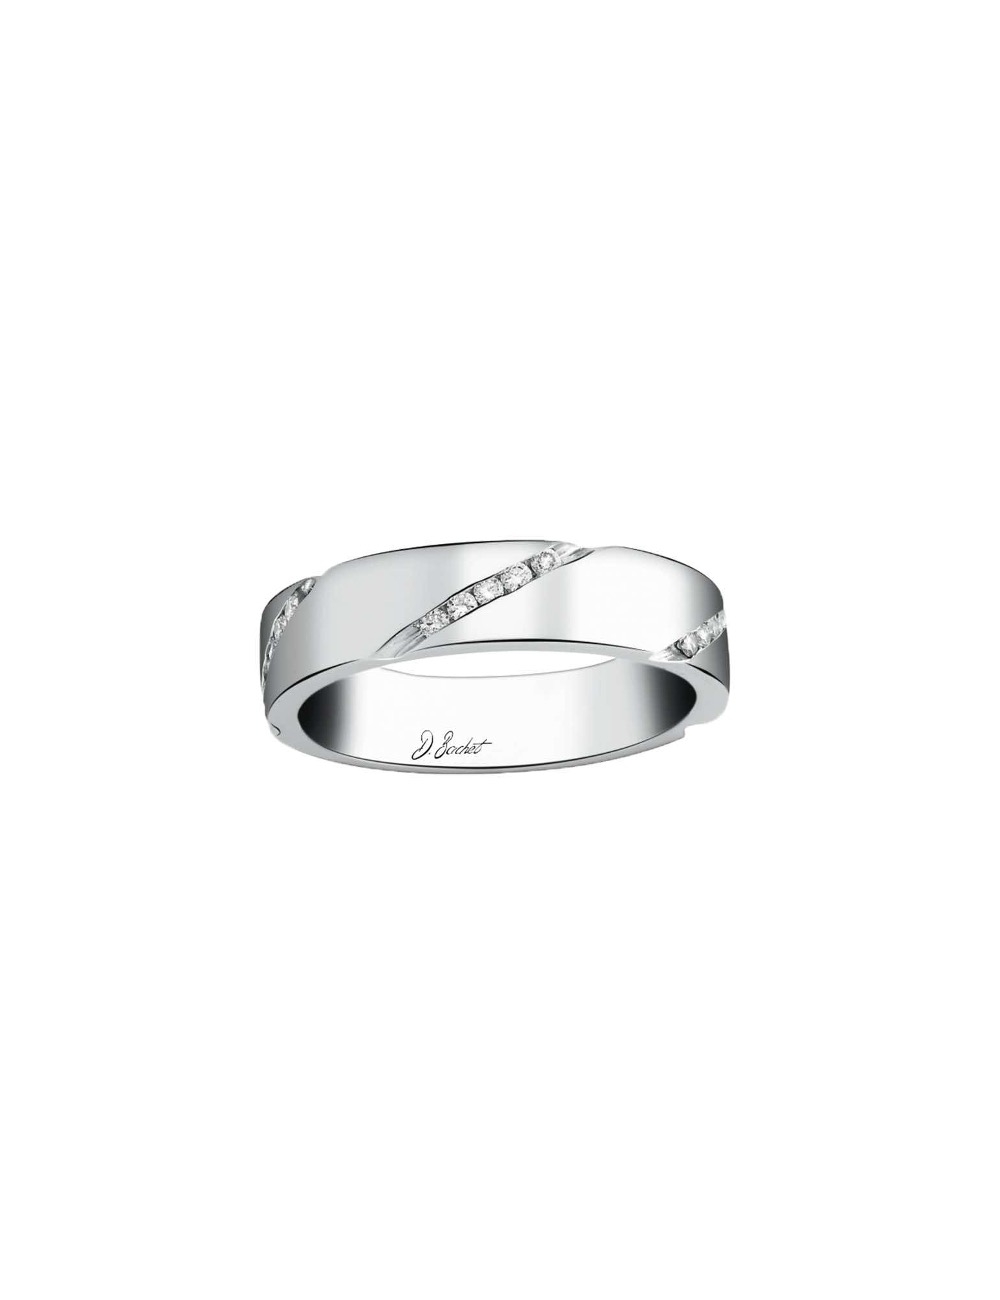 Graphic white diamond women's wedding band, available in platinum, yellow/rose gold, also in black diamonds.